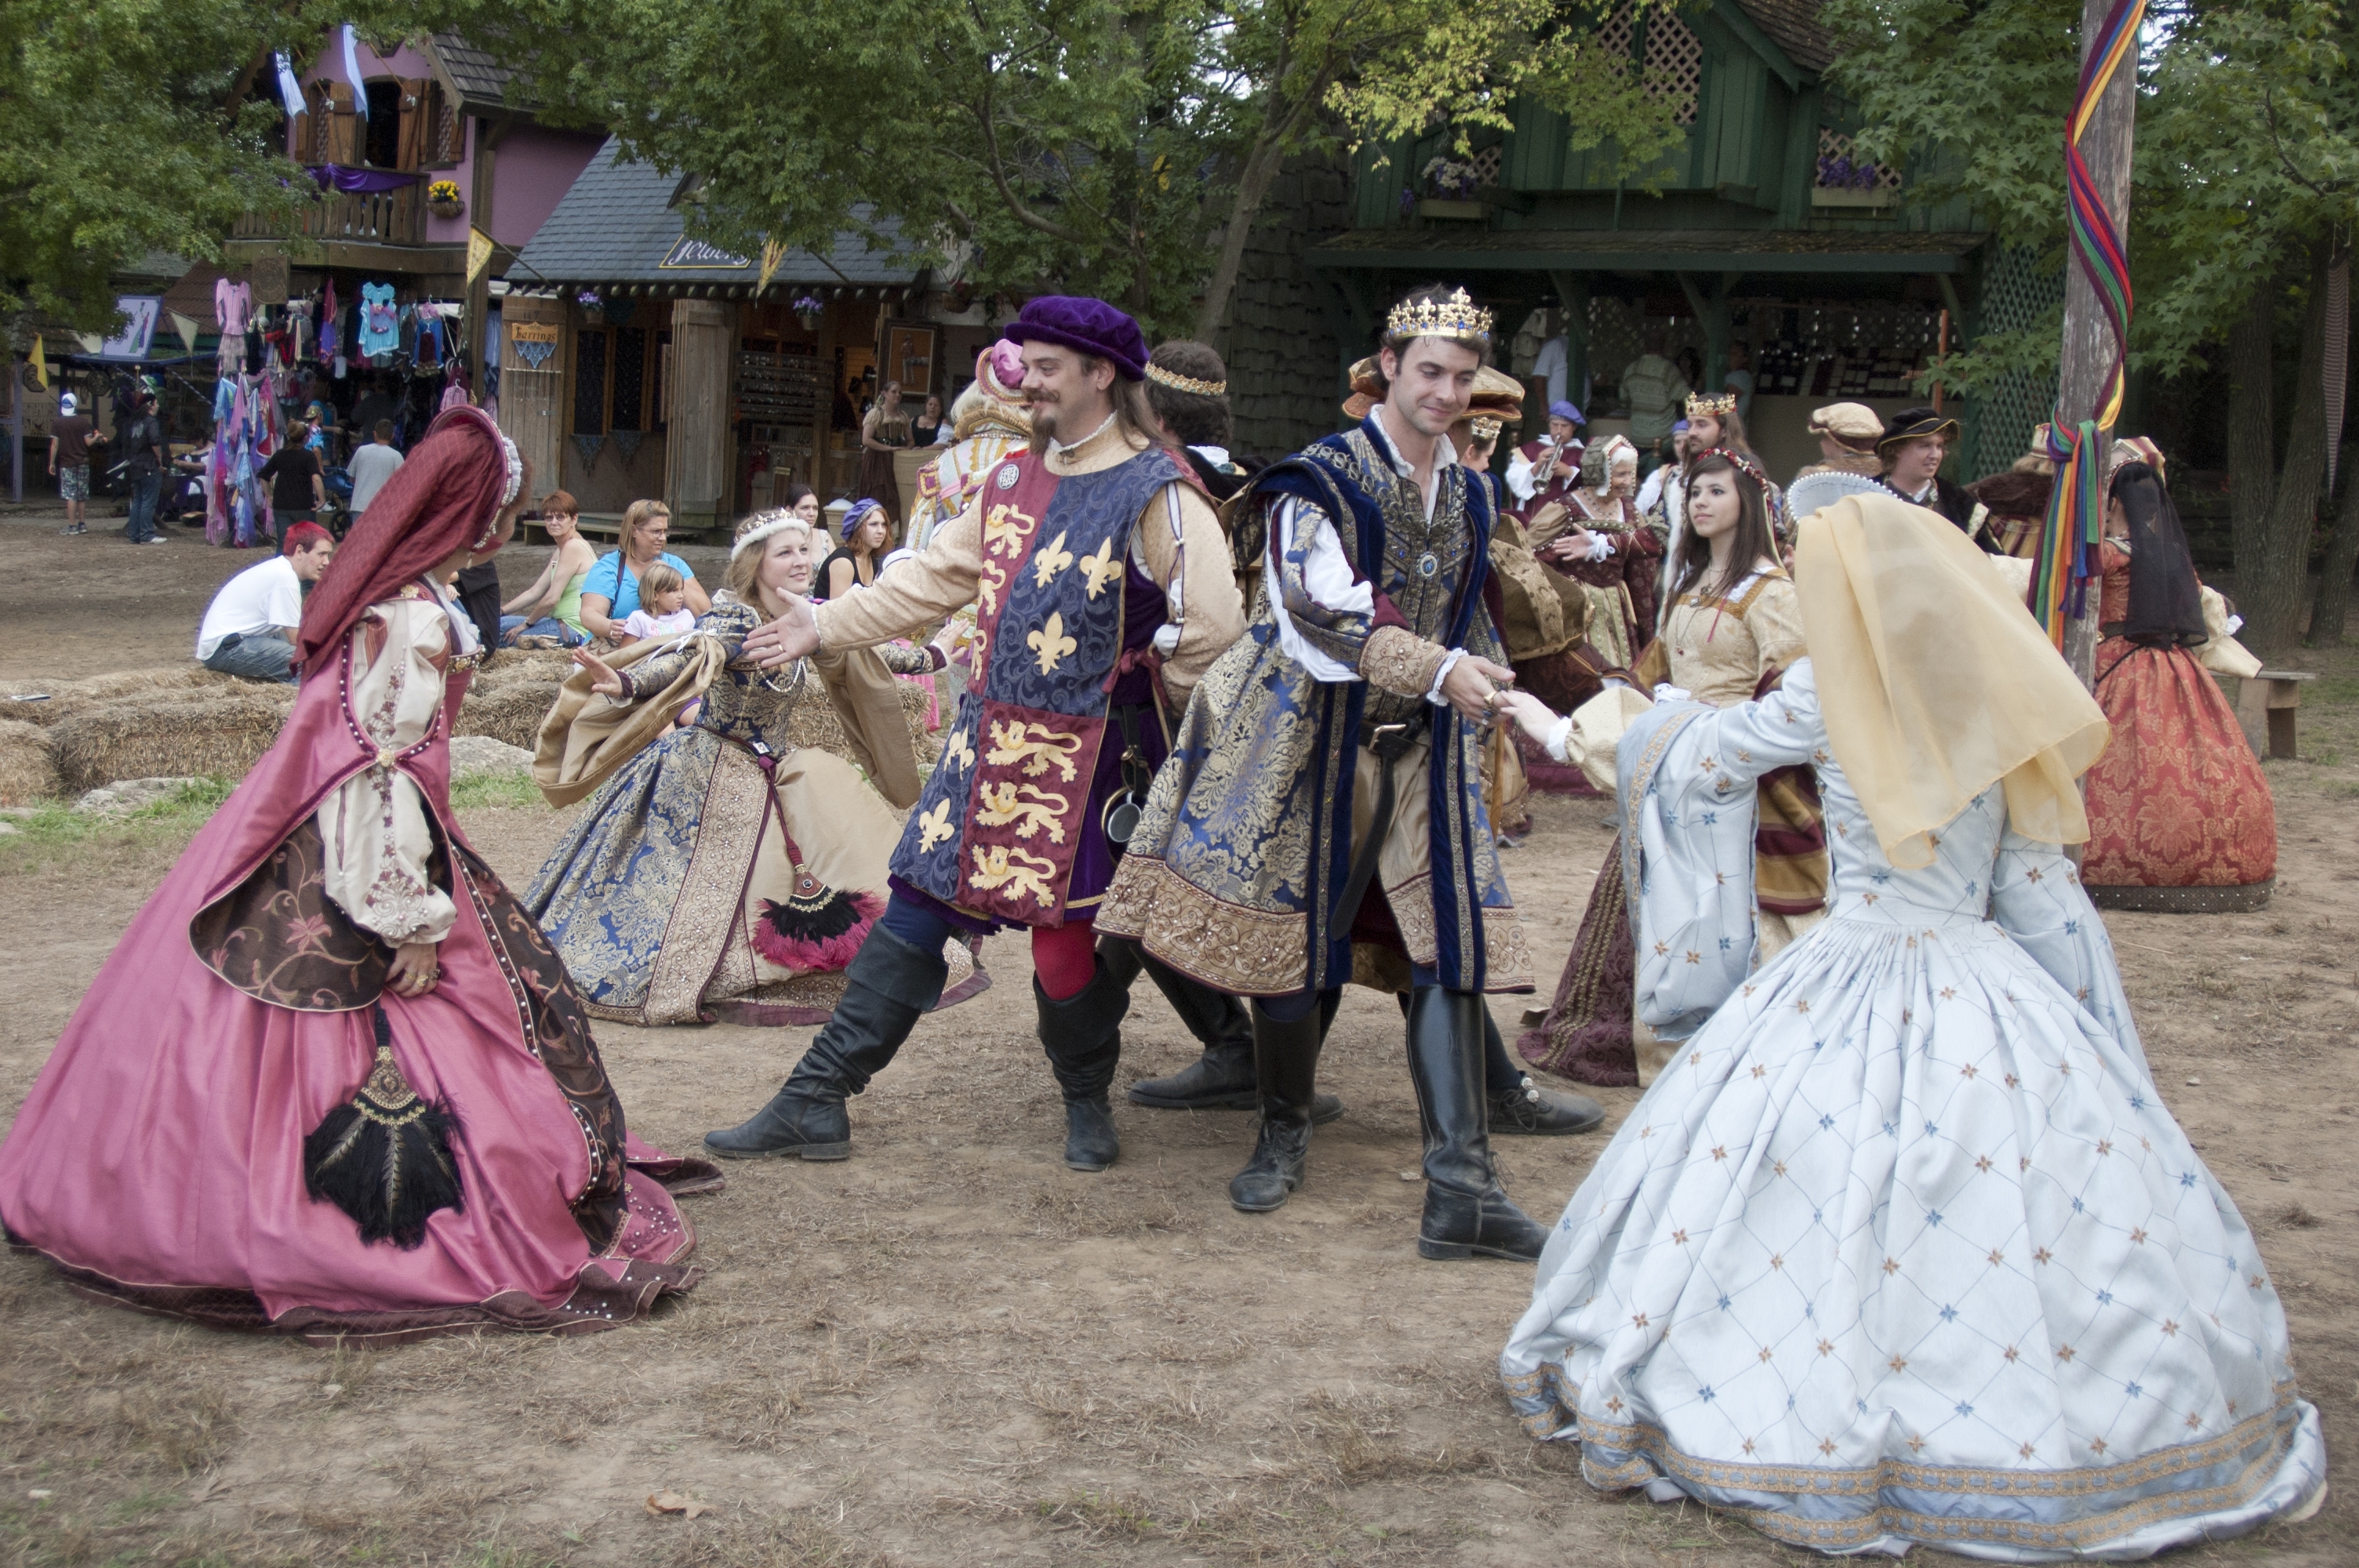 A recent survey asked Ren Faire performers why they were compelled to parti...